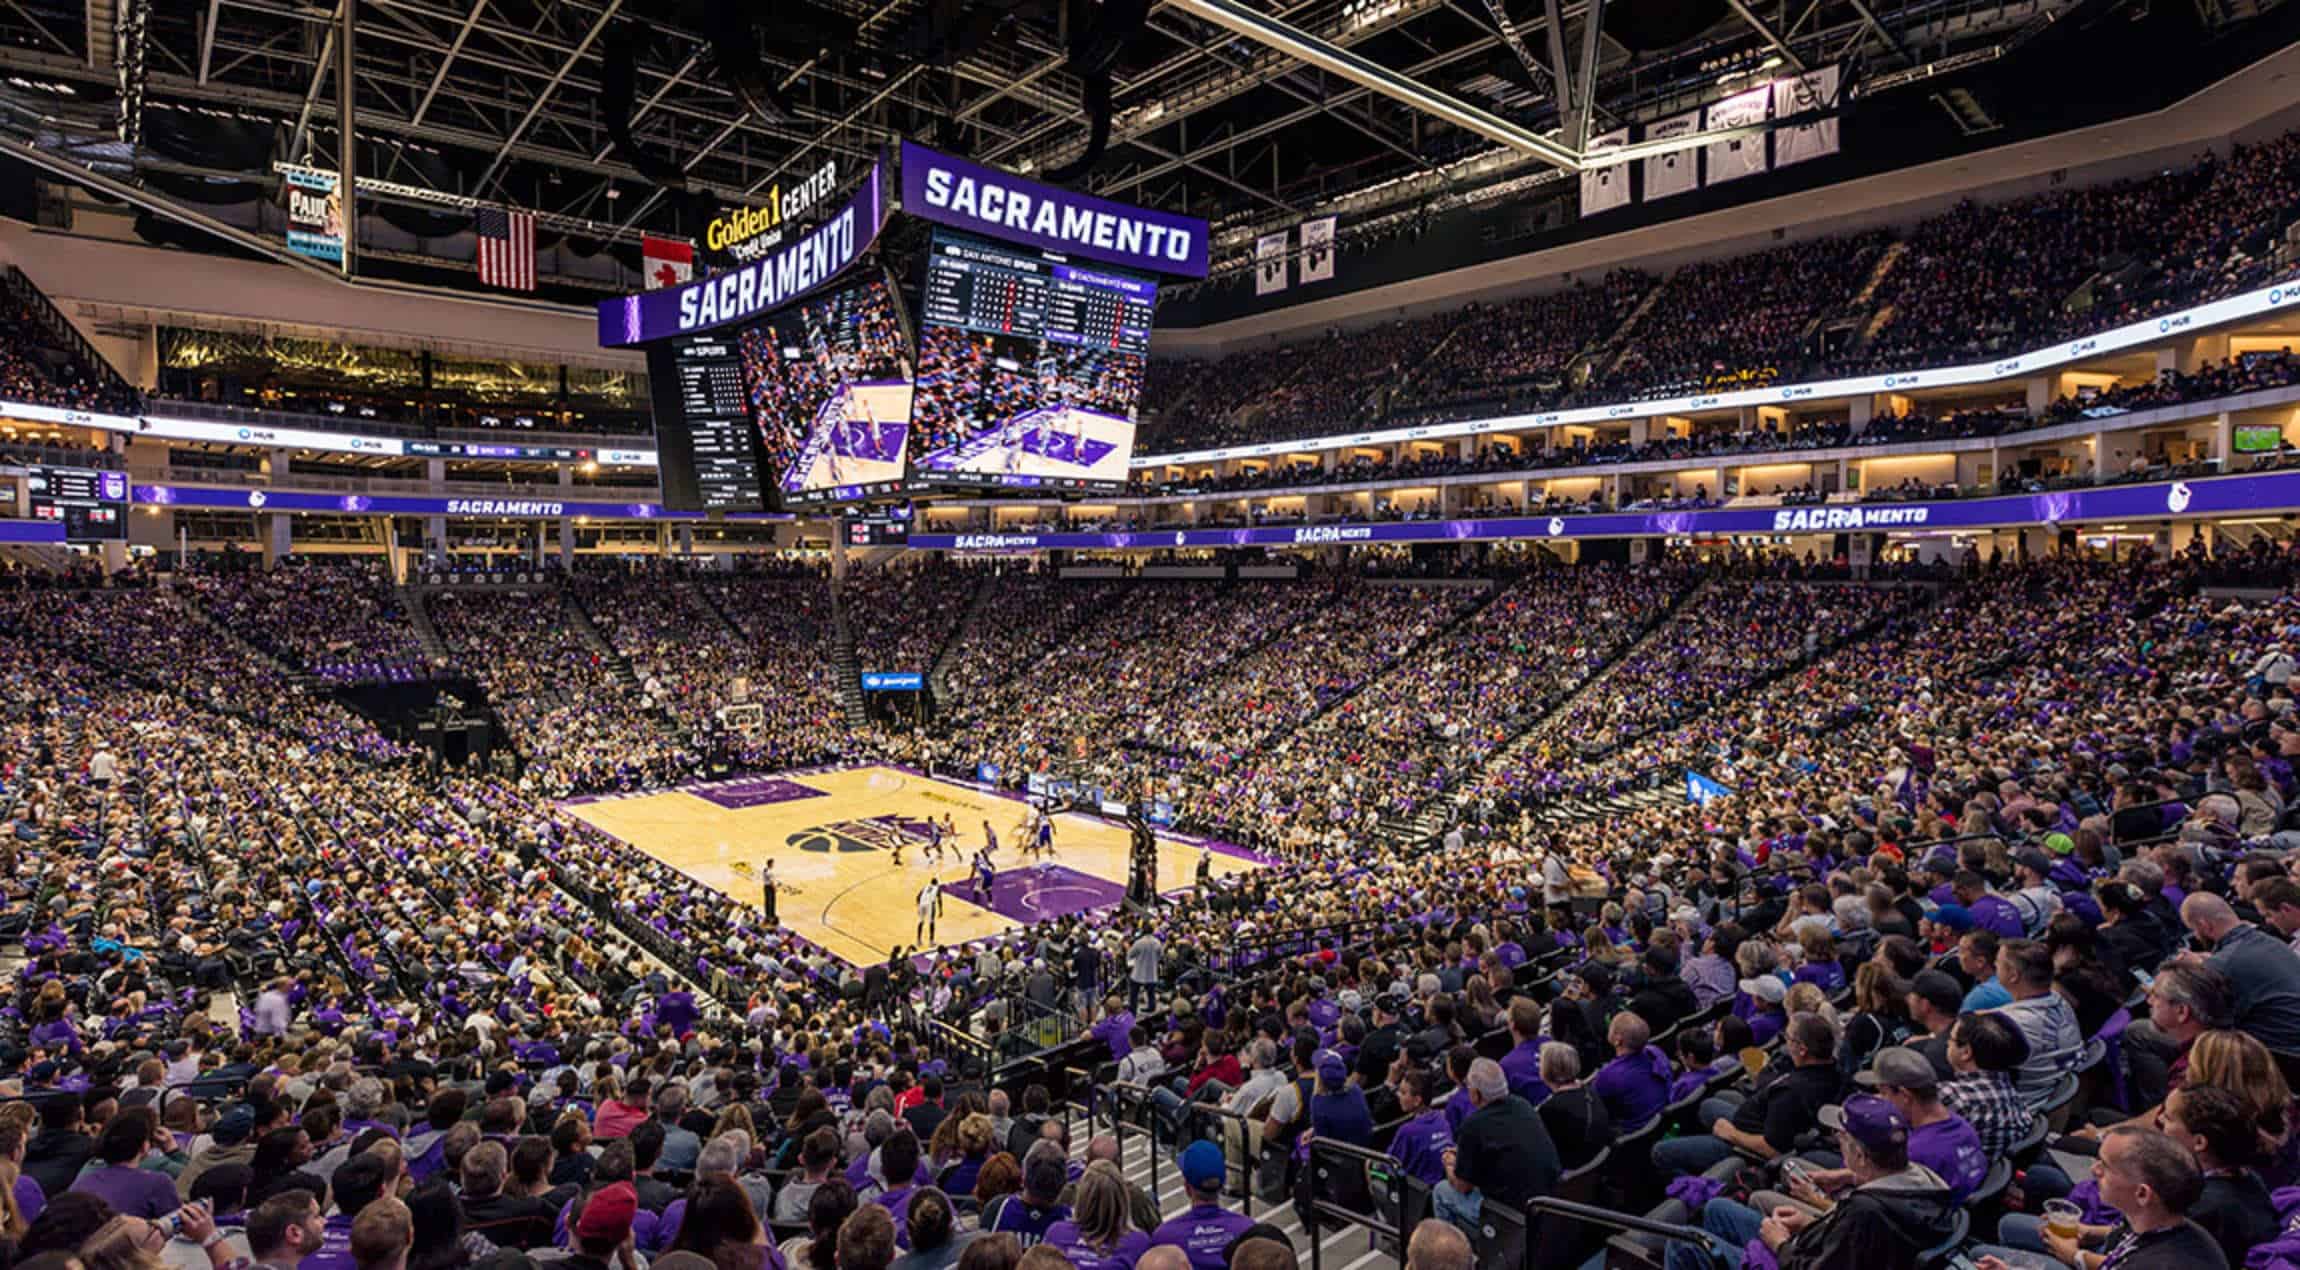 NBA’s Sacramento Kings Partners with Ankr to Support The Growth of Blockchain Industry